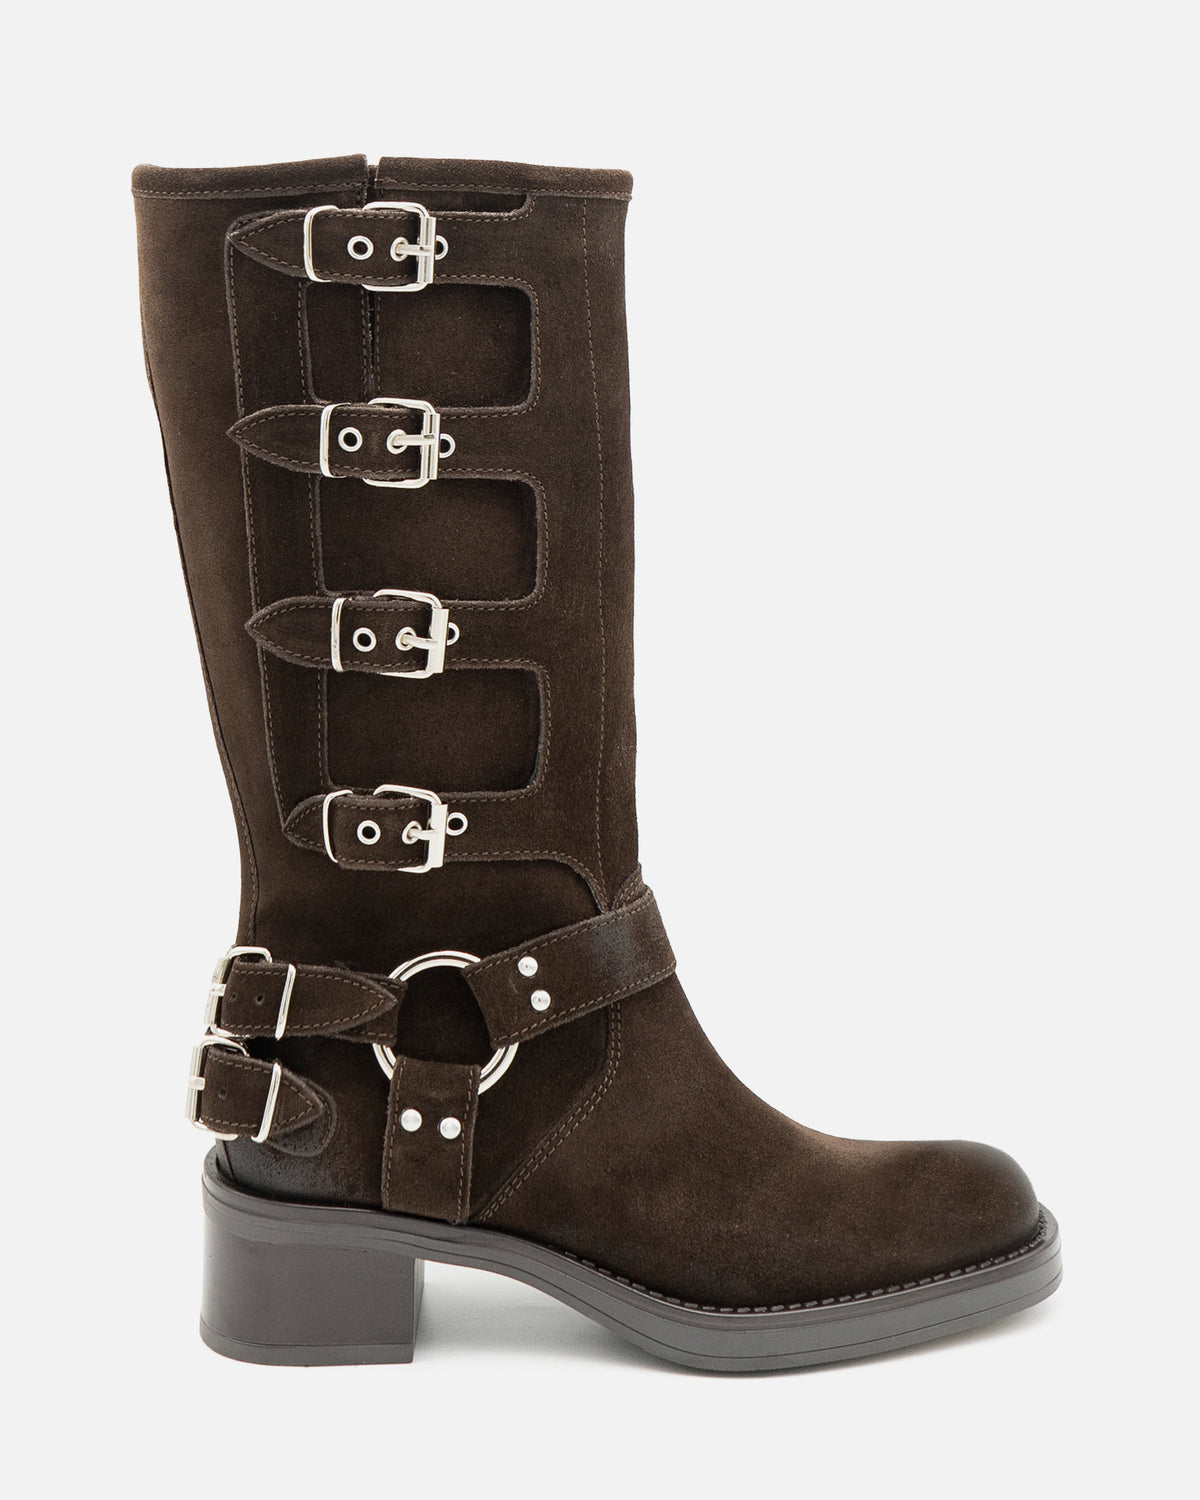 ZOE MULTI SUEDE LEATHER BOOTS